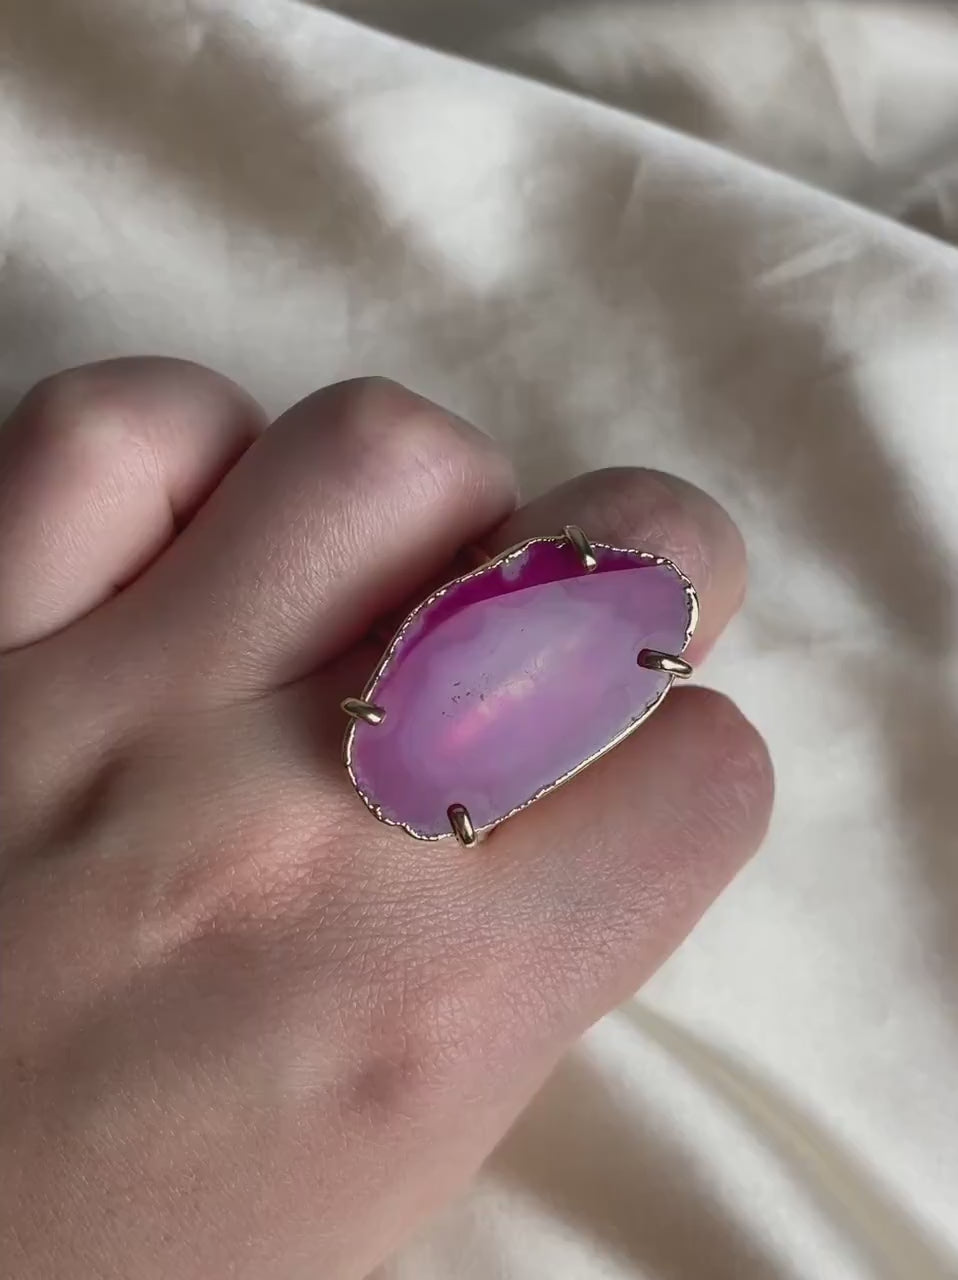 Pink Agate Statement Ring Gold Plated Adjustable, Geode Slice Ring, Gifts For Her, G15-82